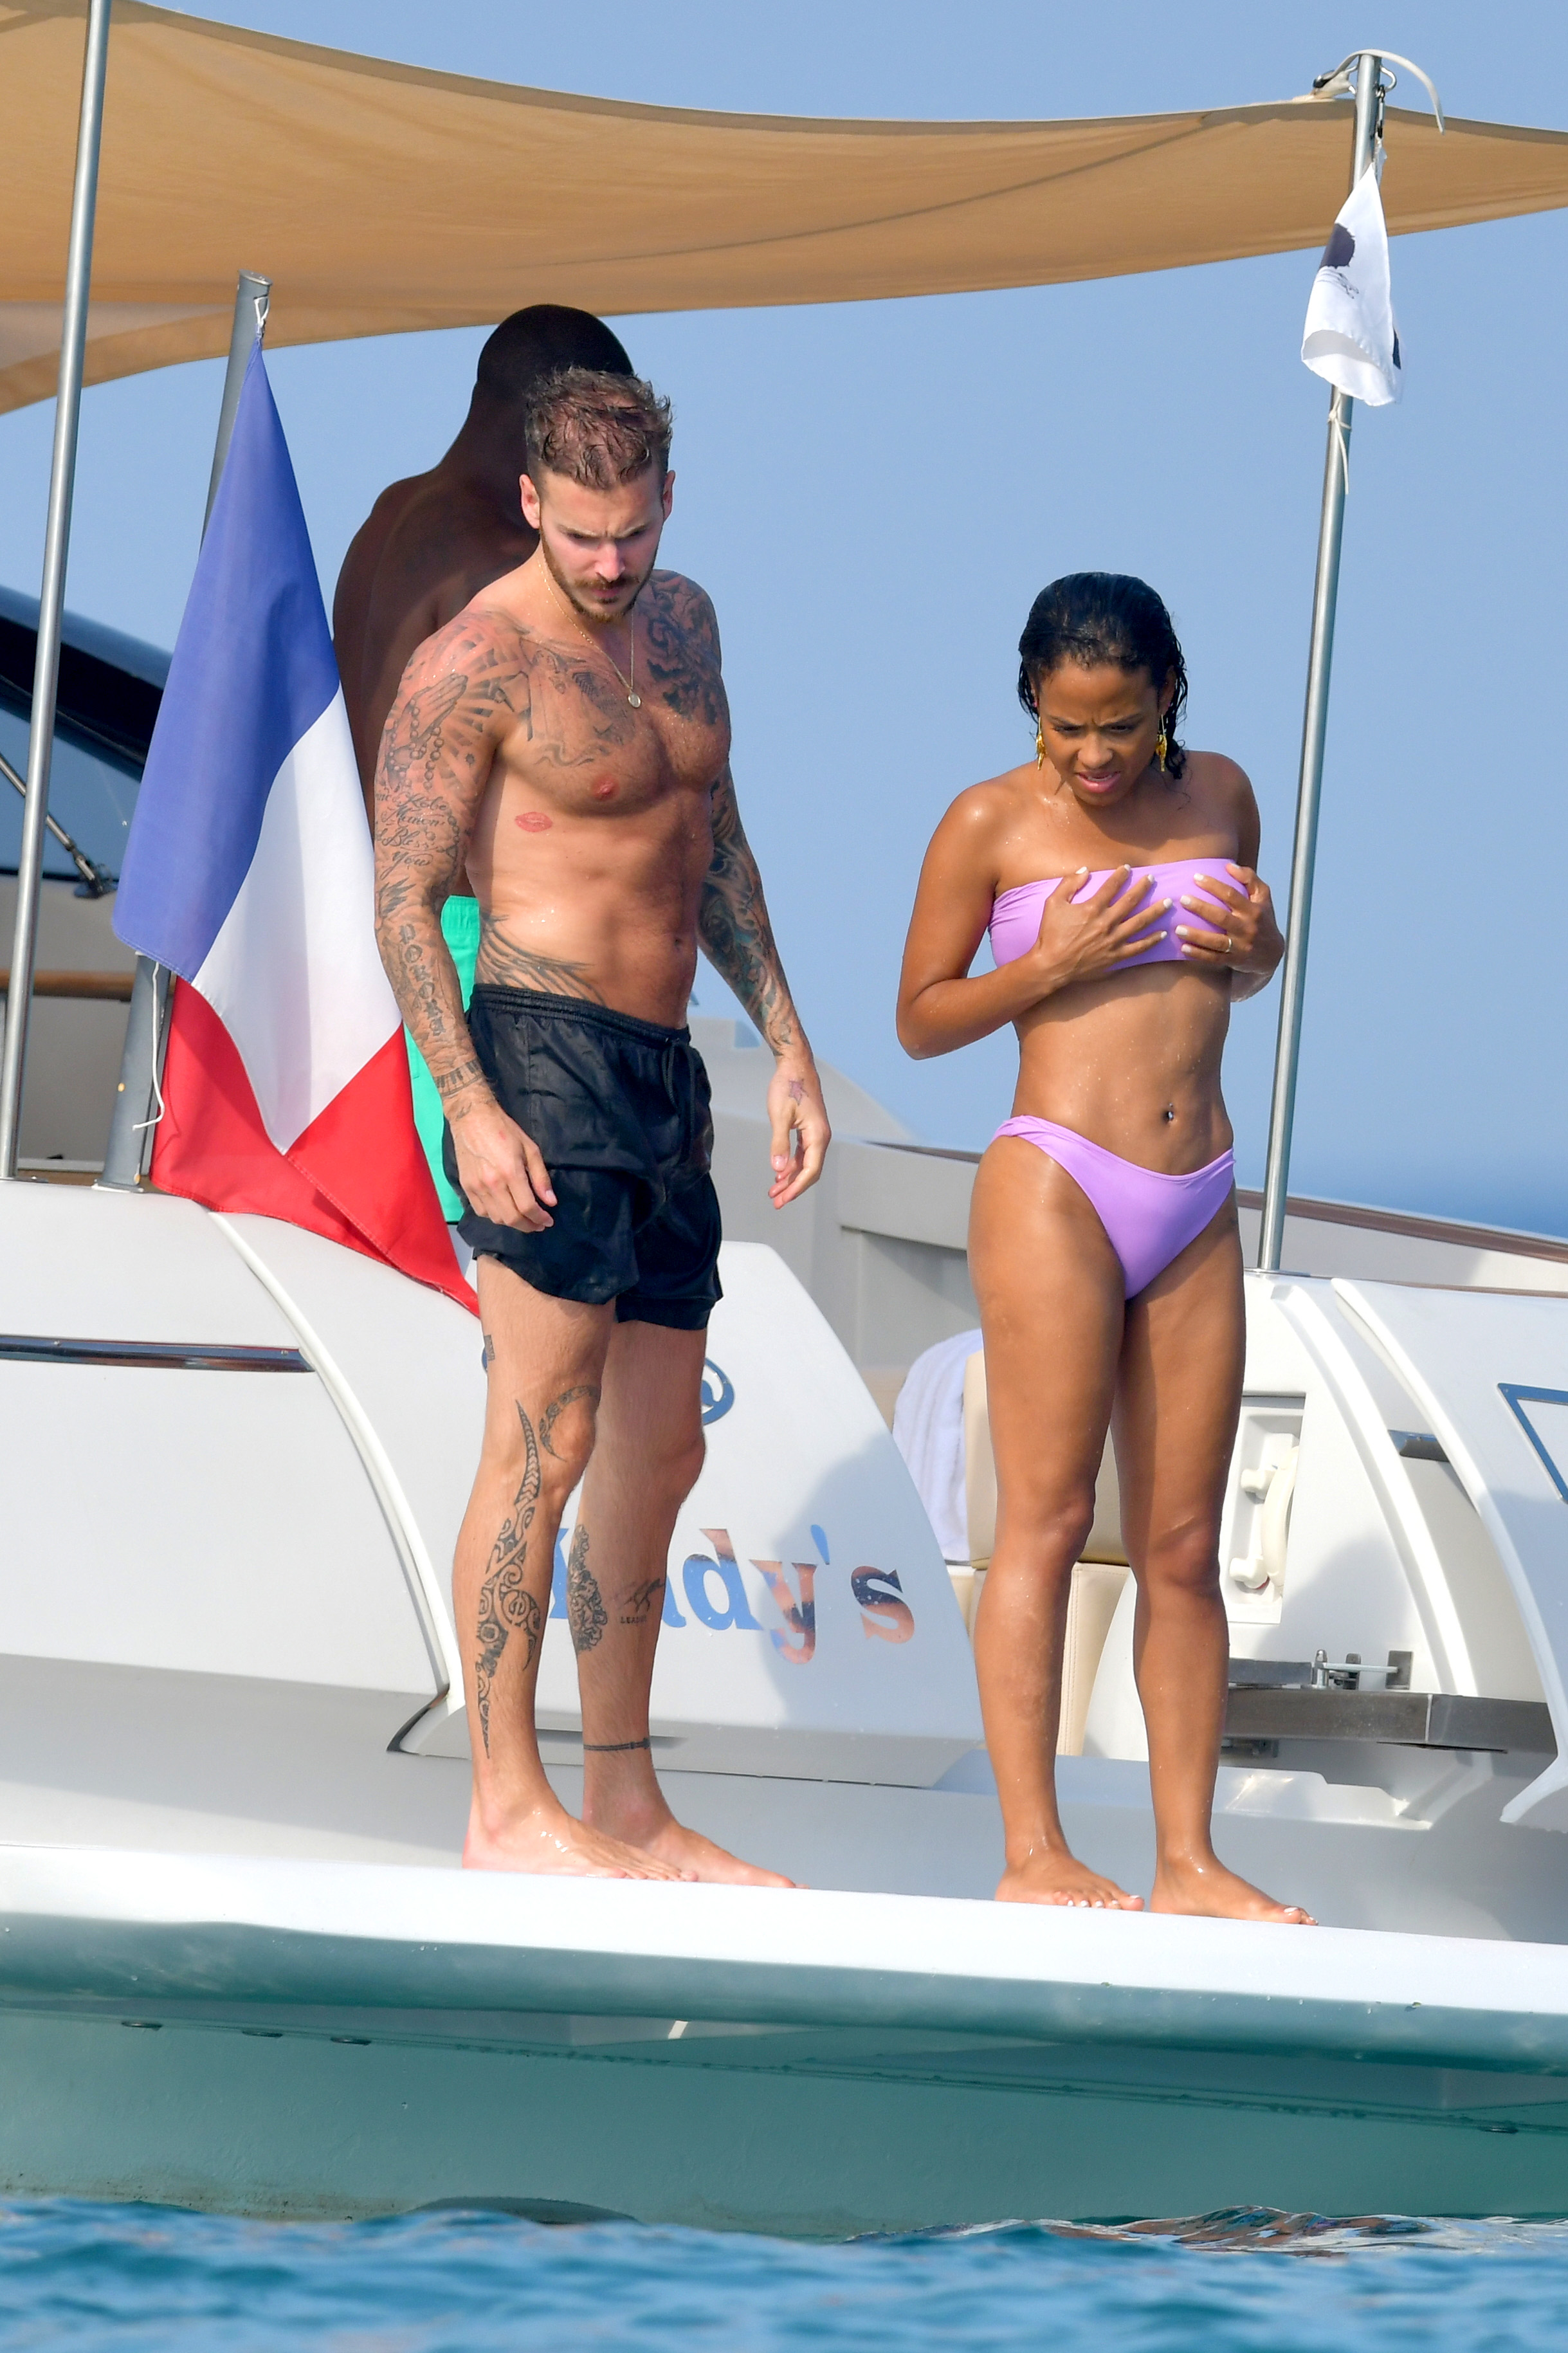 Christina Milian pokies and cameltoe in sexy bikini candids on a boat during holiday UHQ (42).jpg